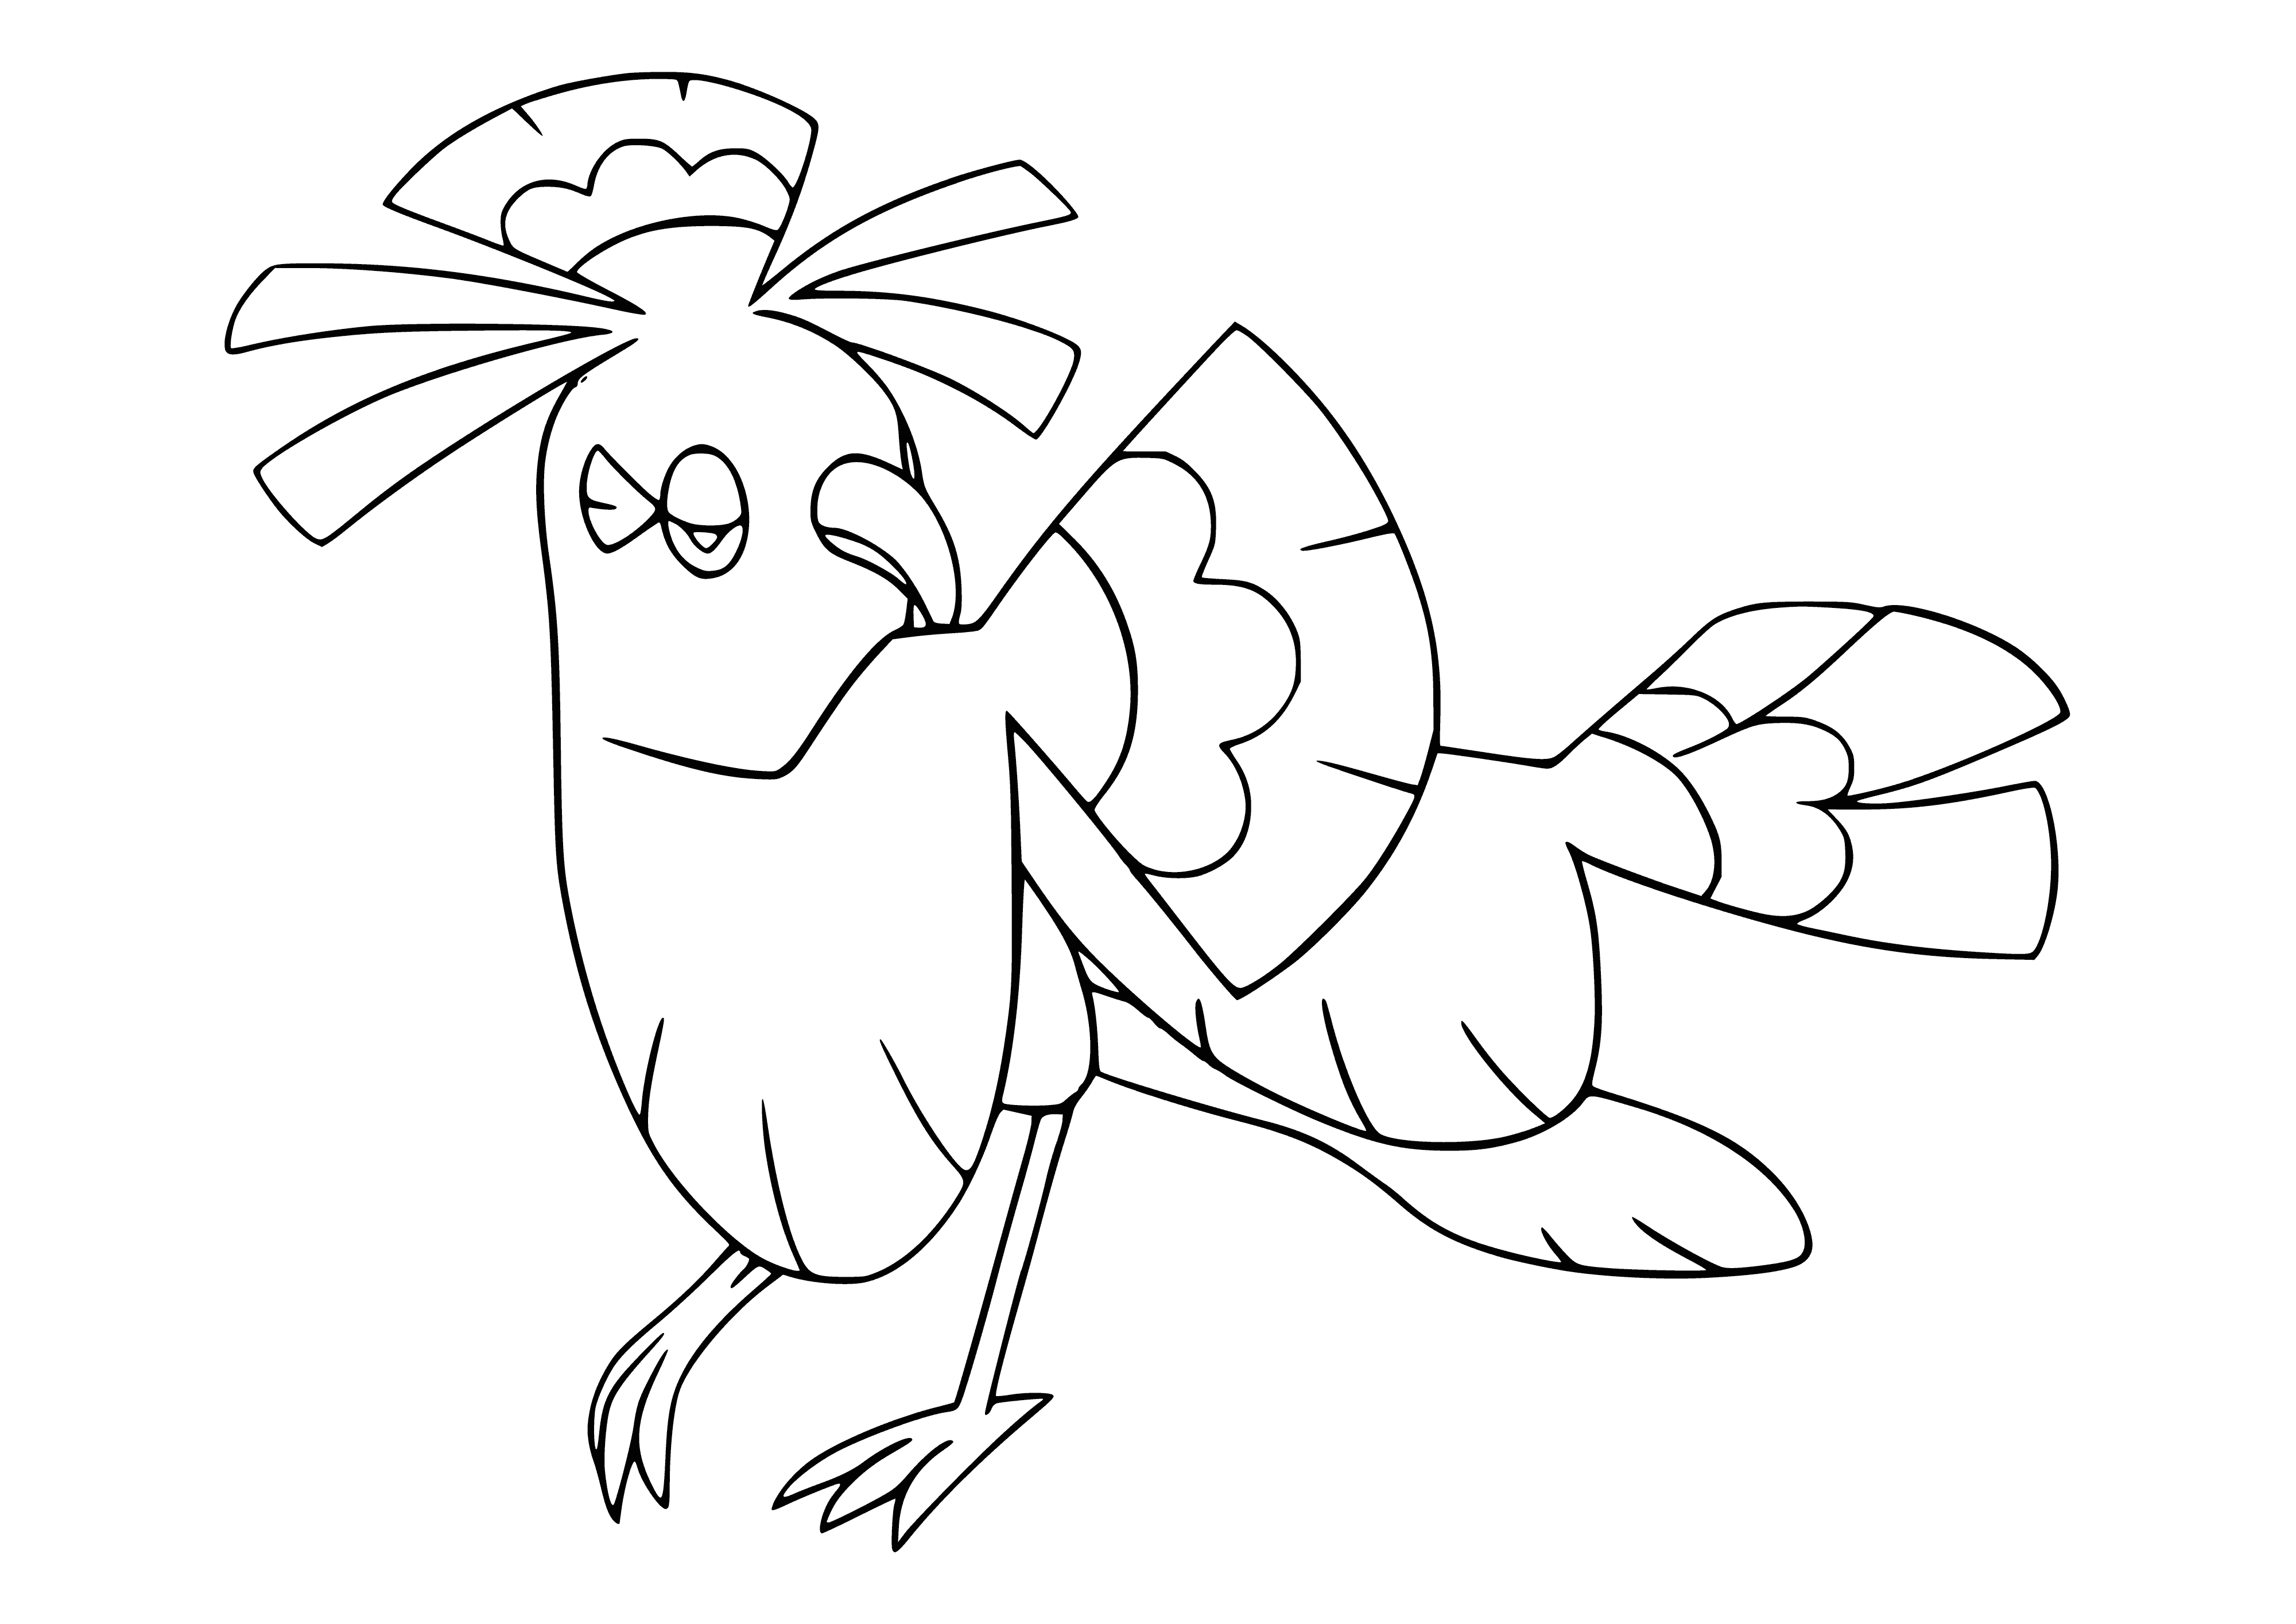 coloring page: Fiery figure, slender body, wide wings, colorful scales, burning tail feathers floats in midair.